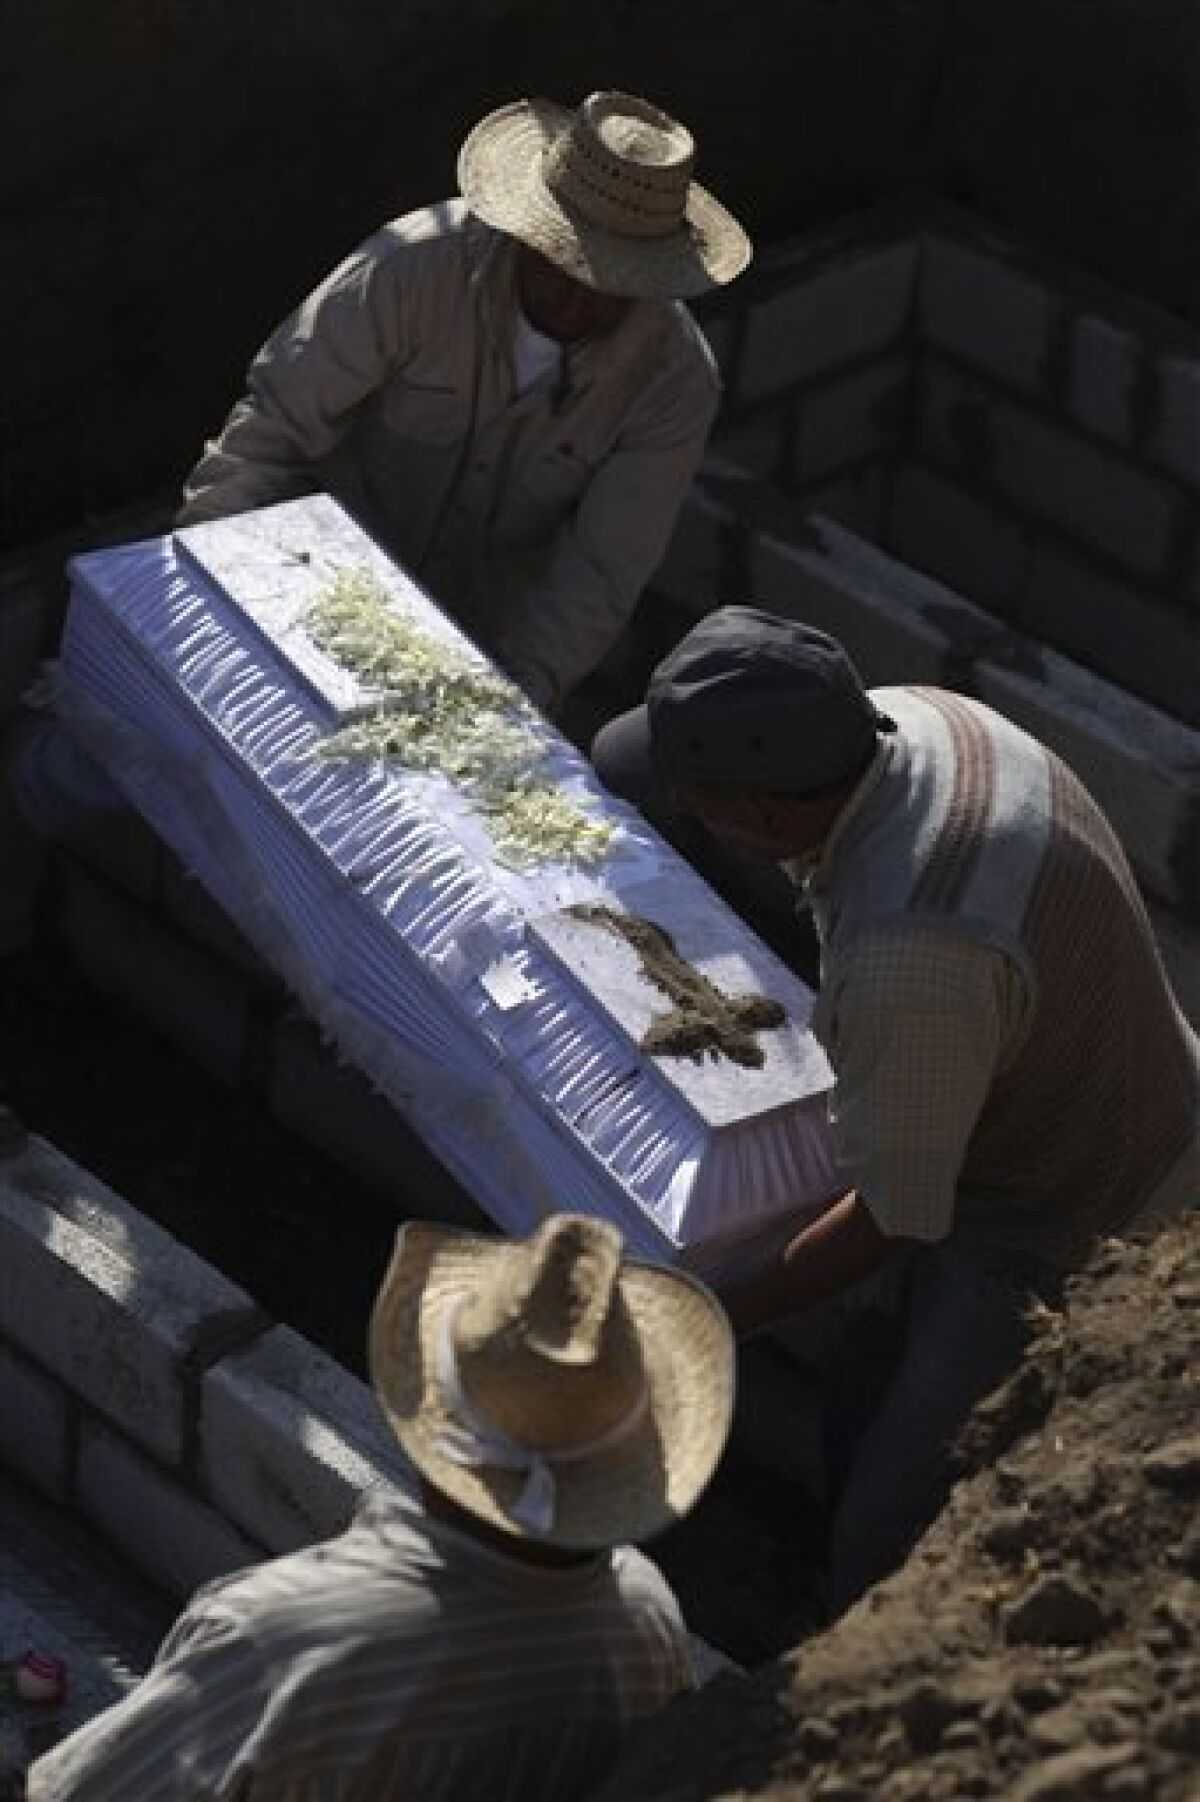 People bury a victim of the oil pipeline explosion in a cemetery in San Geronimo, Mexico, Monday Dec. 20, 2010. The Sunday explosion in the nearby town of San Martin Texmelucan laid waste to parts of the central Mexican city, incinerating people, cars, houses and trees as gushing crude turned streets into flaming rivers. At least 28 people were killed, 13 of them children, in a disaster authorities blame on oil thieves. (AP Photo/Alexandre Meneghini)